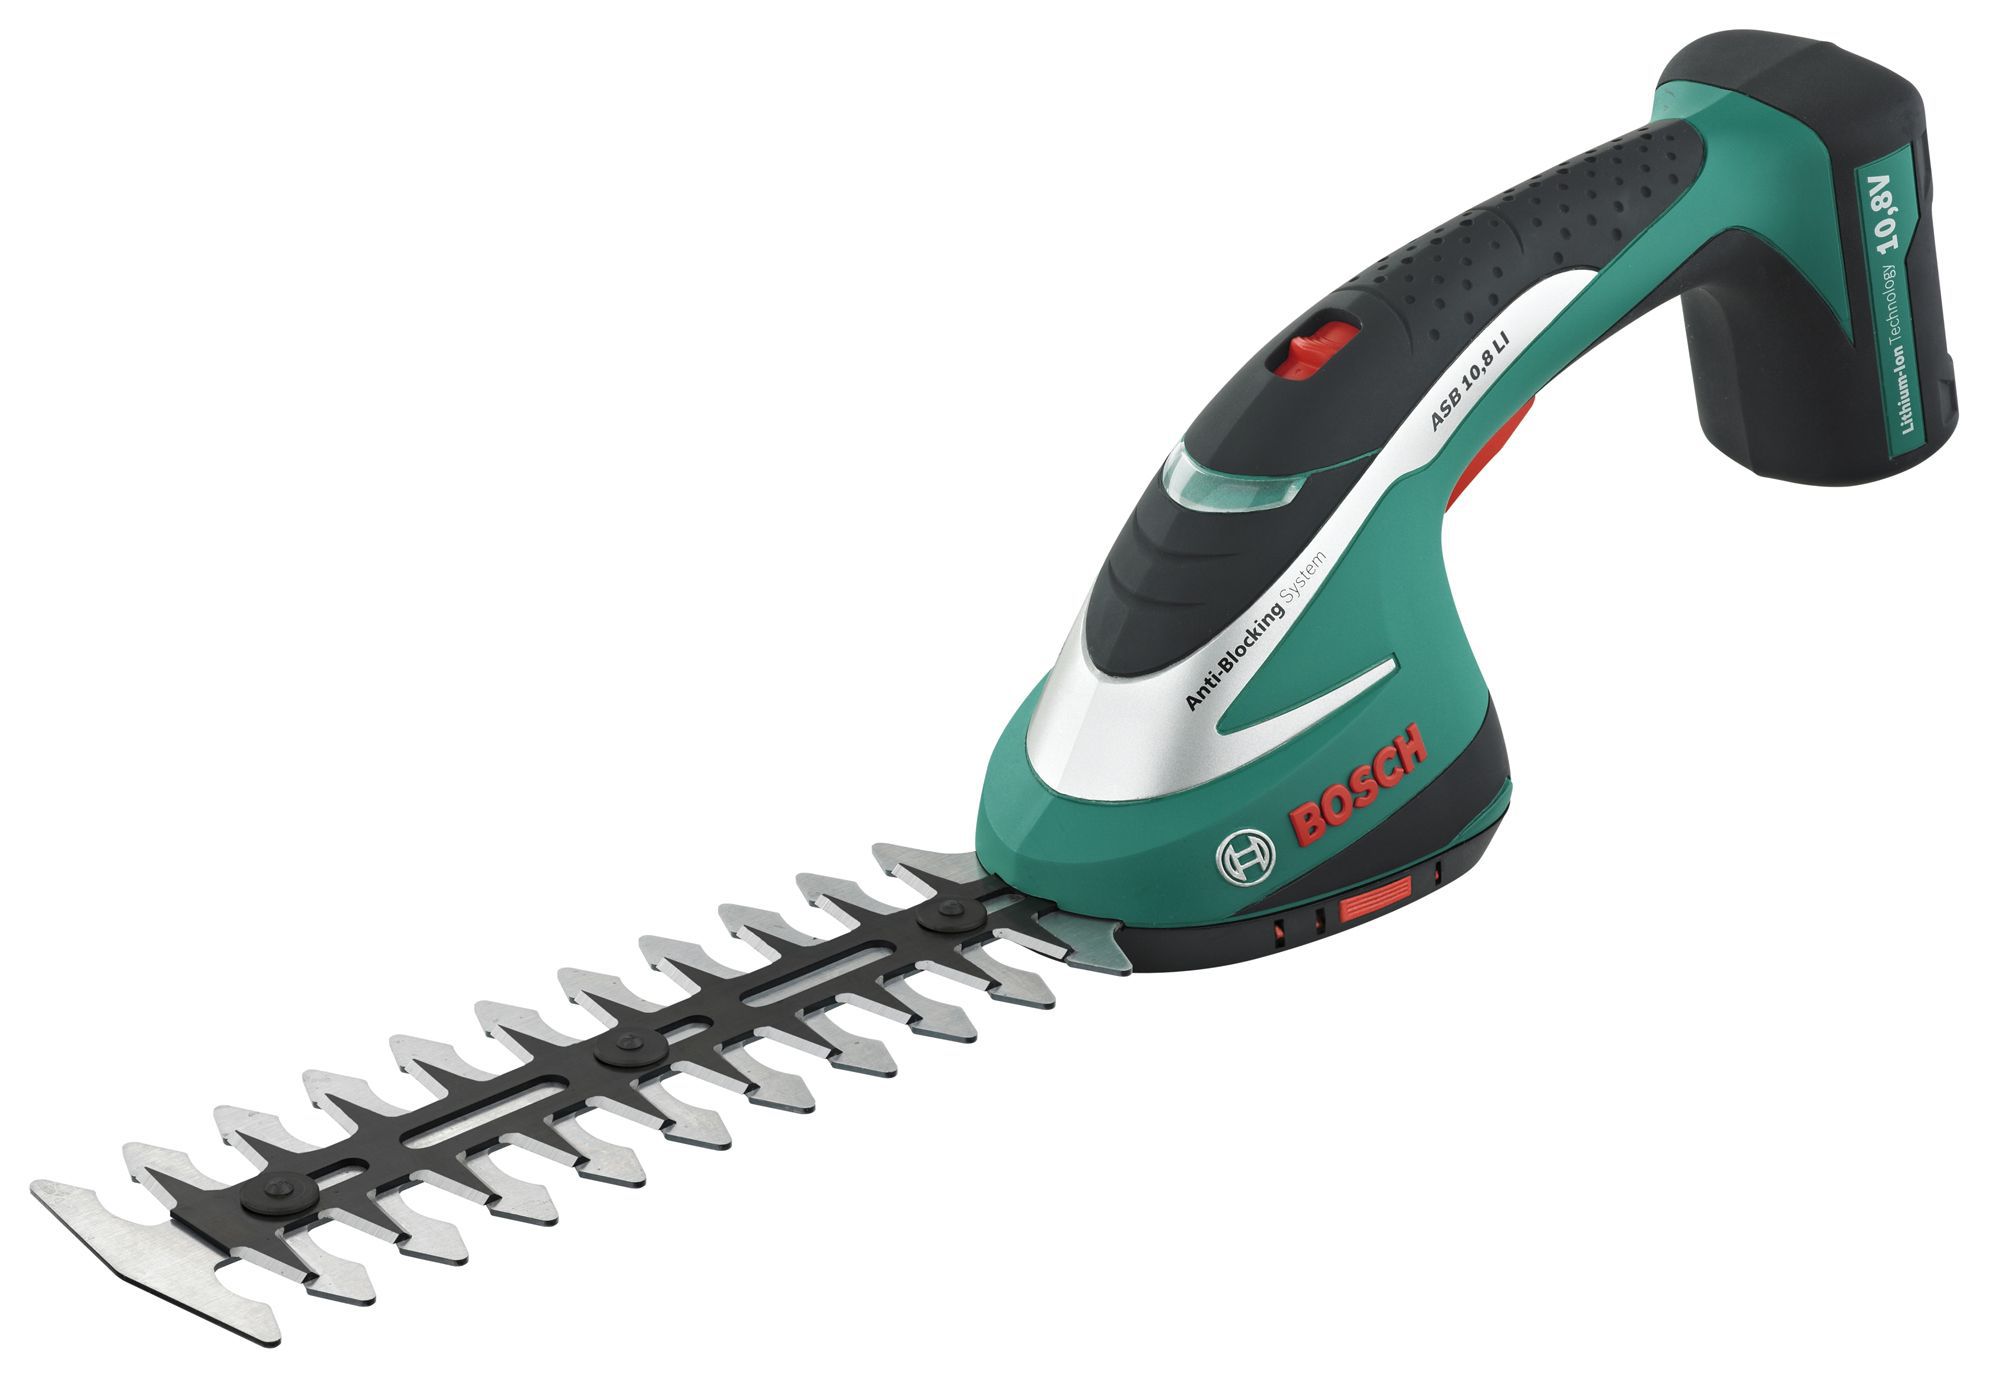 Bosch electric hedge trimmer